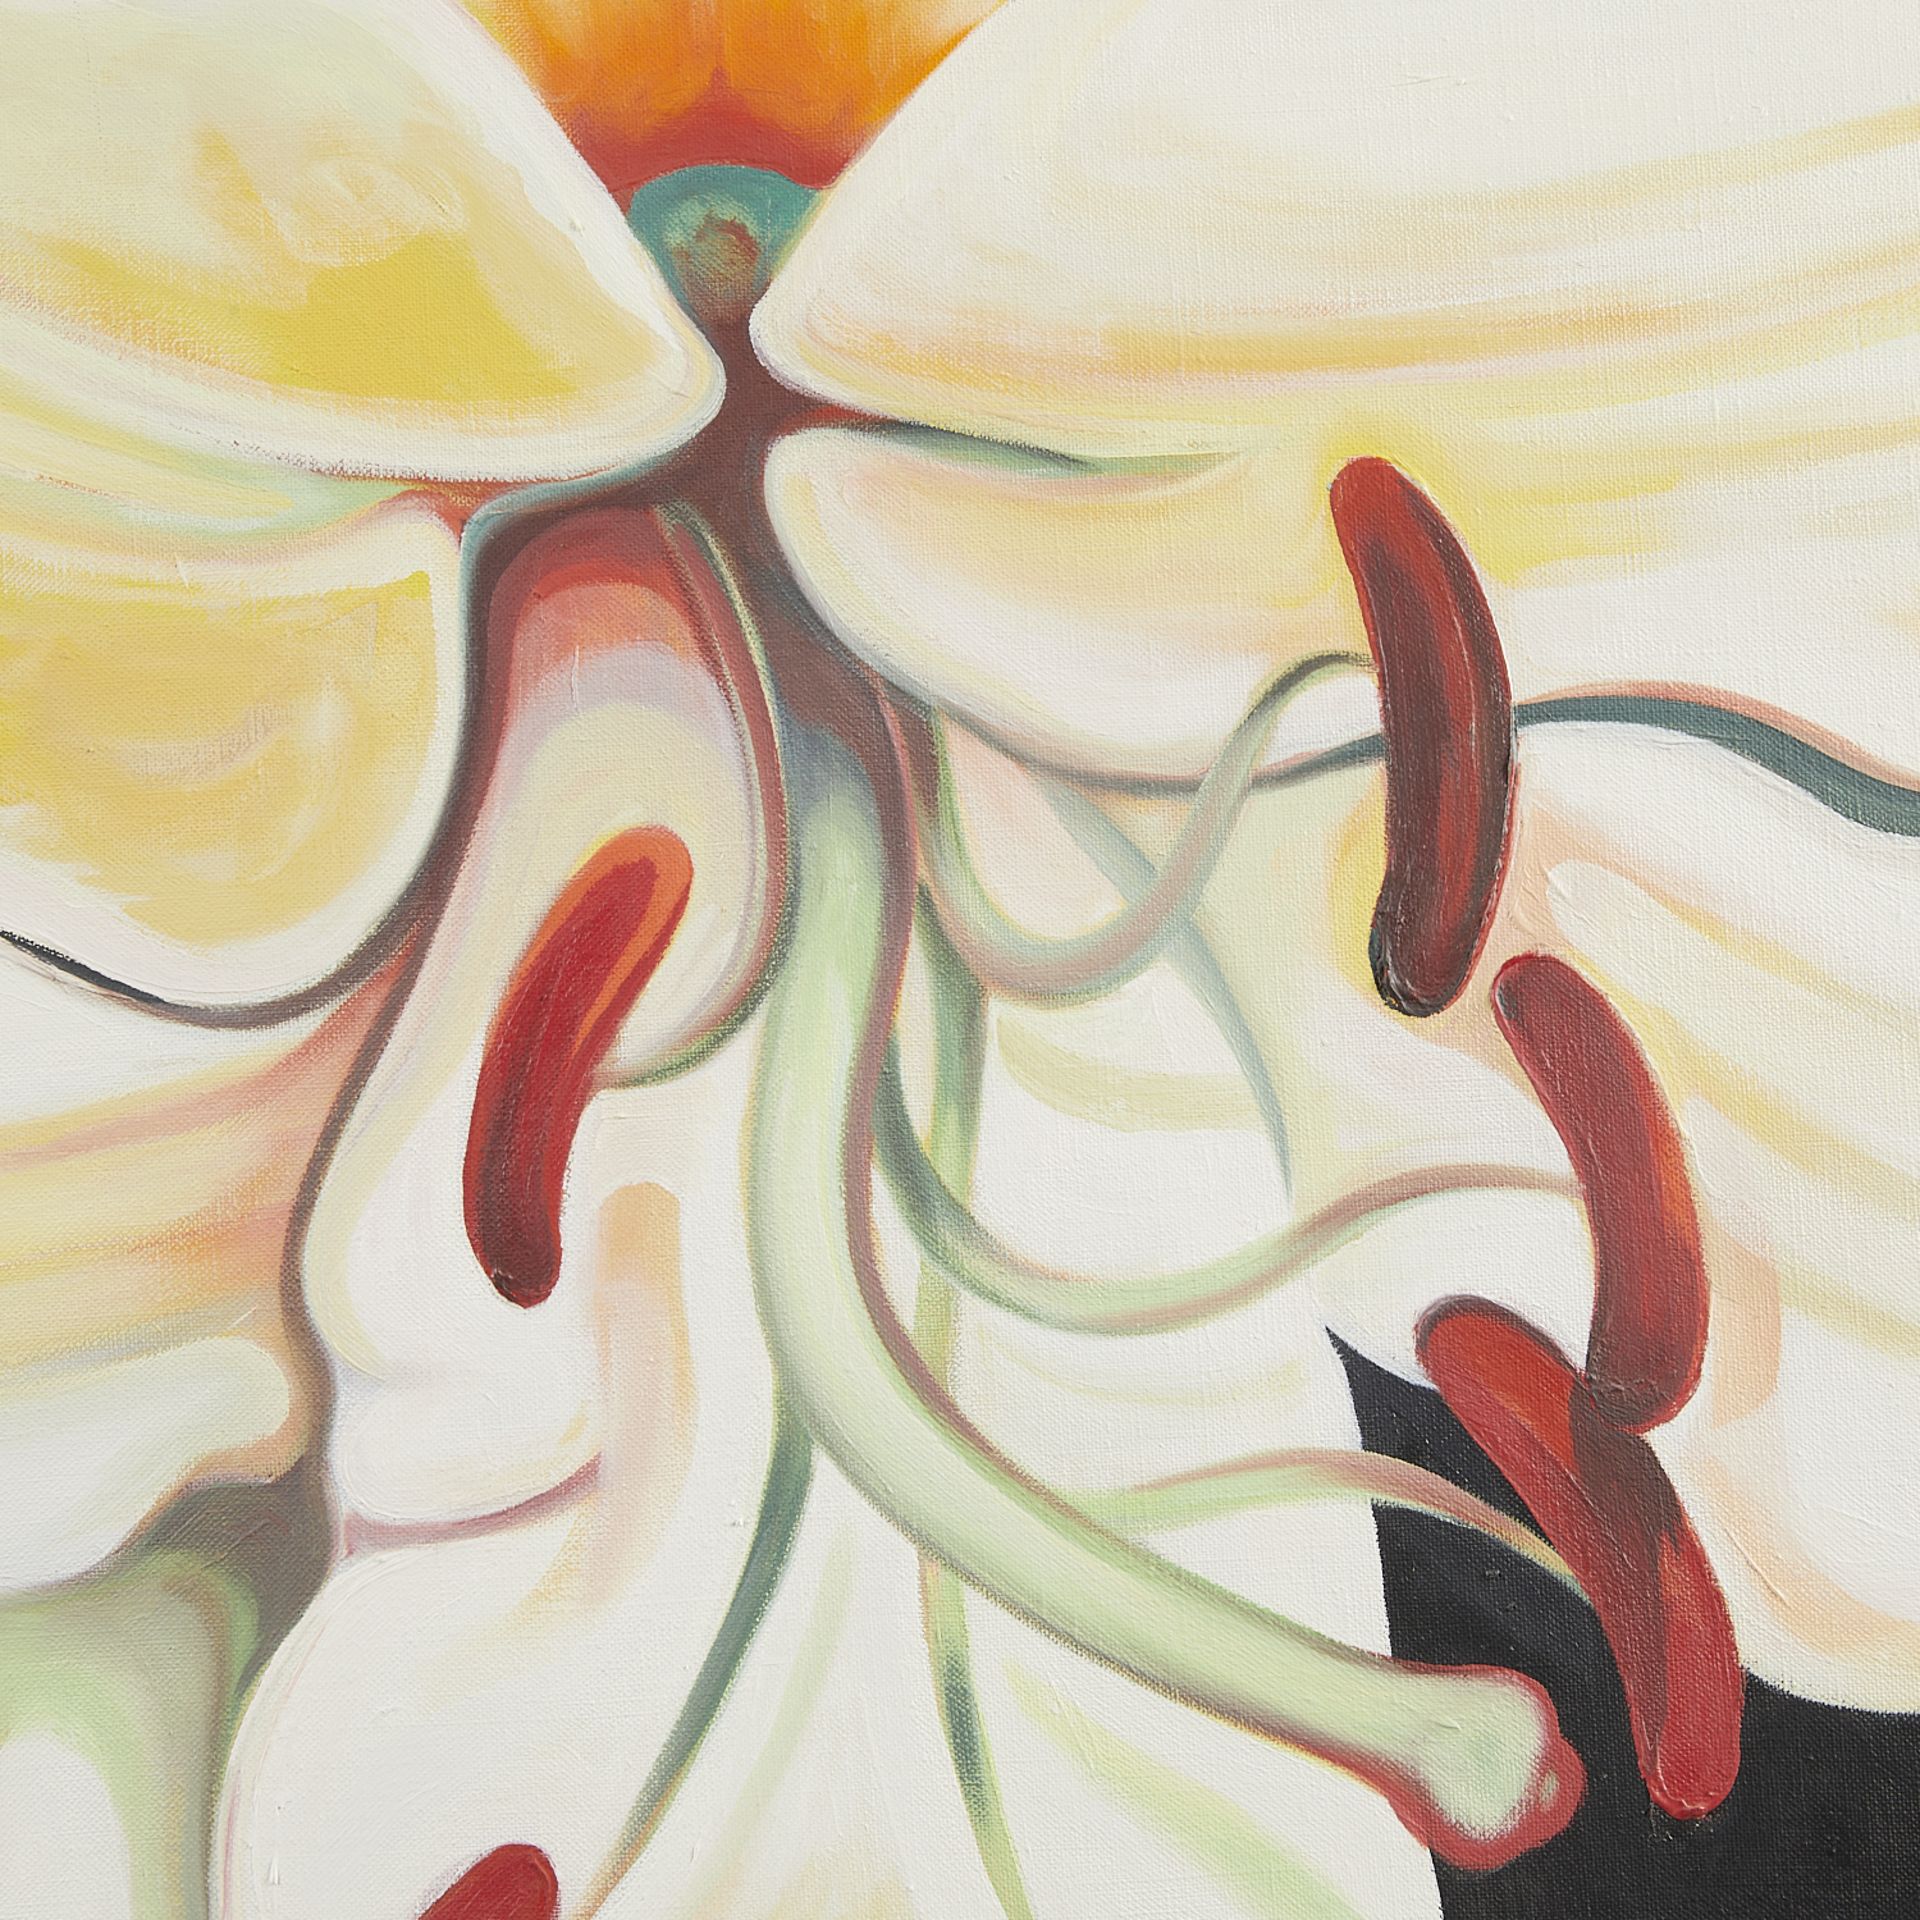 Lowell Nesbitt "Jungle Lily" Oil on Canvas 1987 - Image 2 of 6